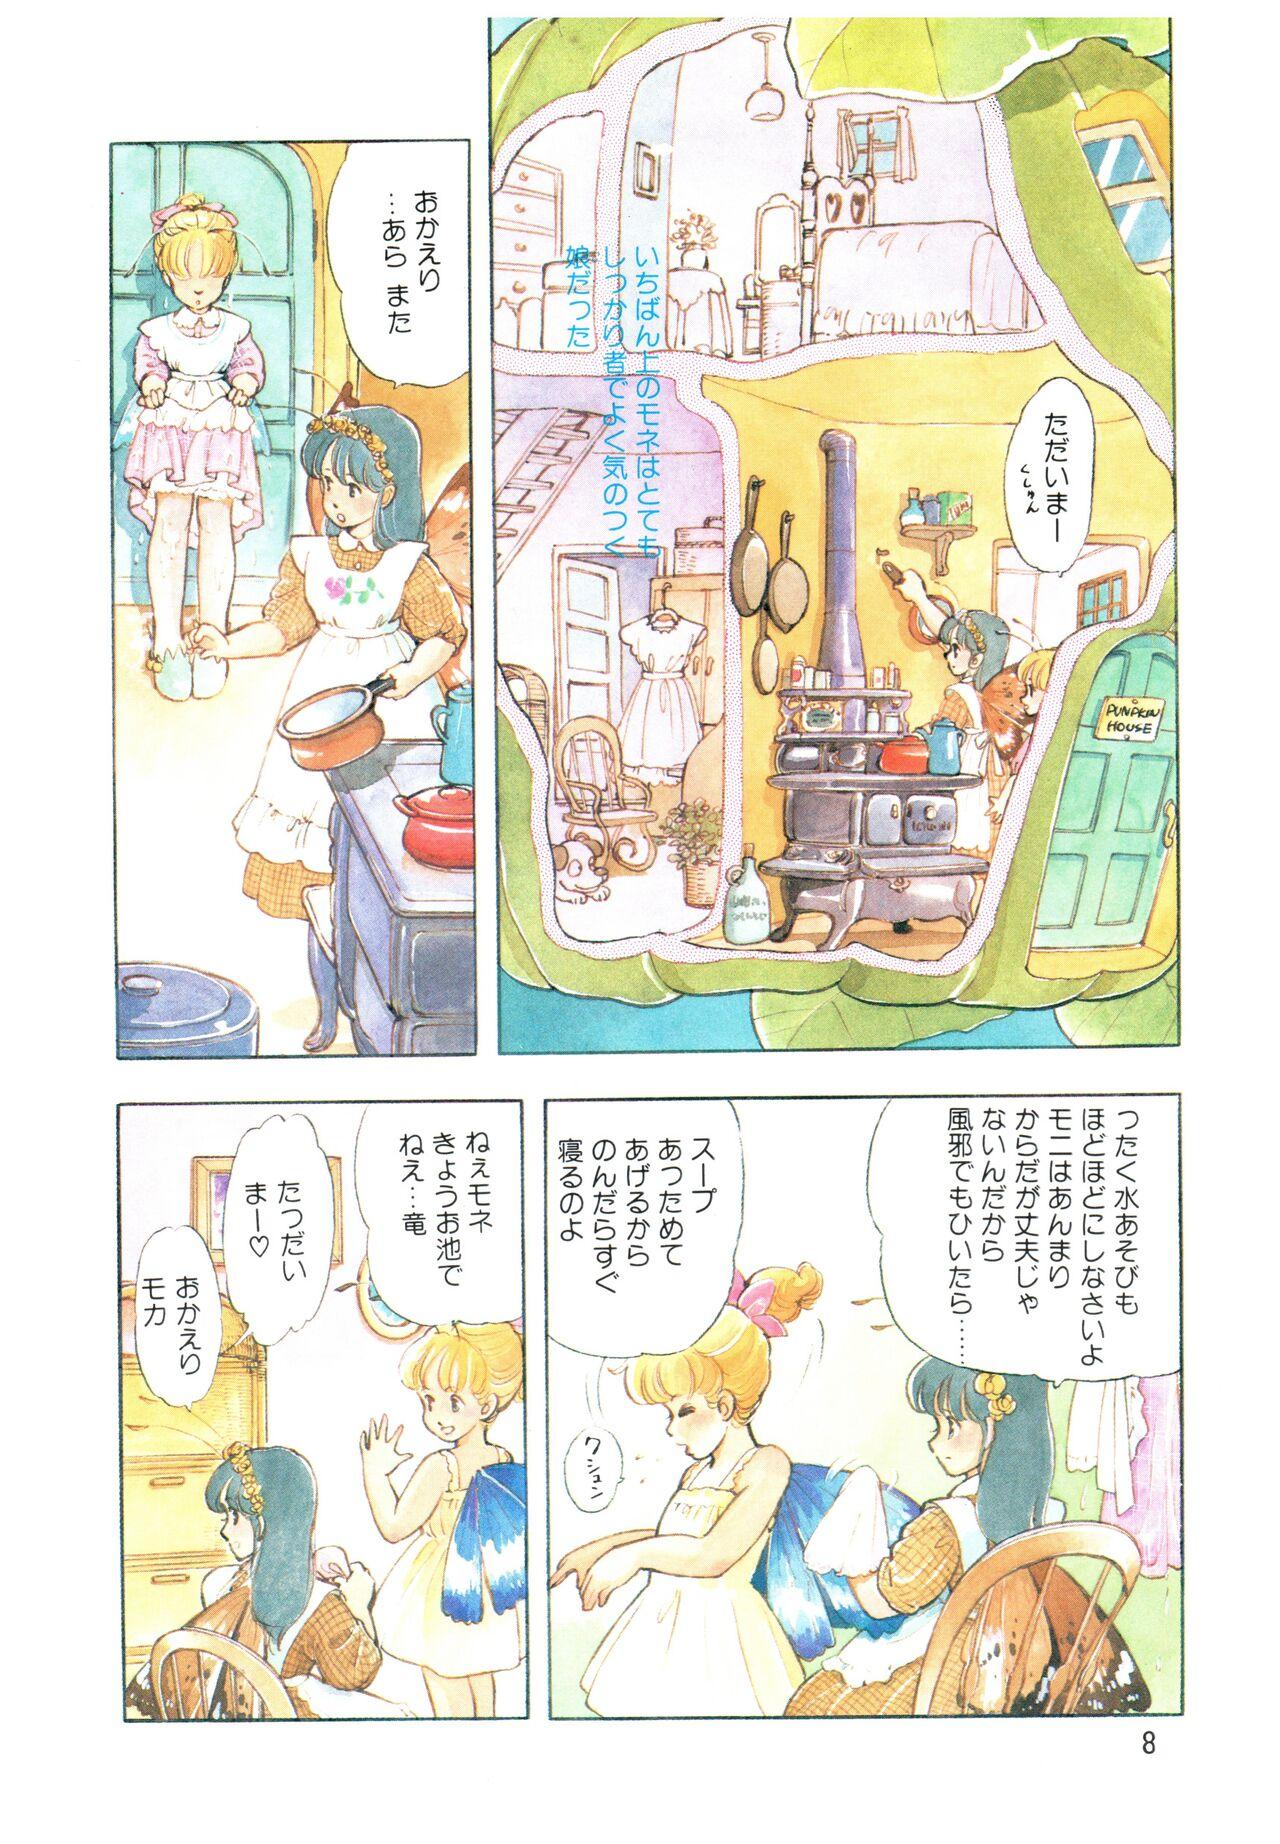 Pretty Manga Burikko 1984-05 extra number Peppermint★Gallery Piss - Page 6